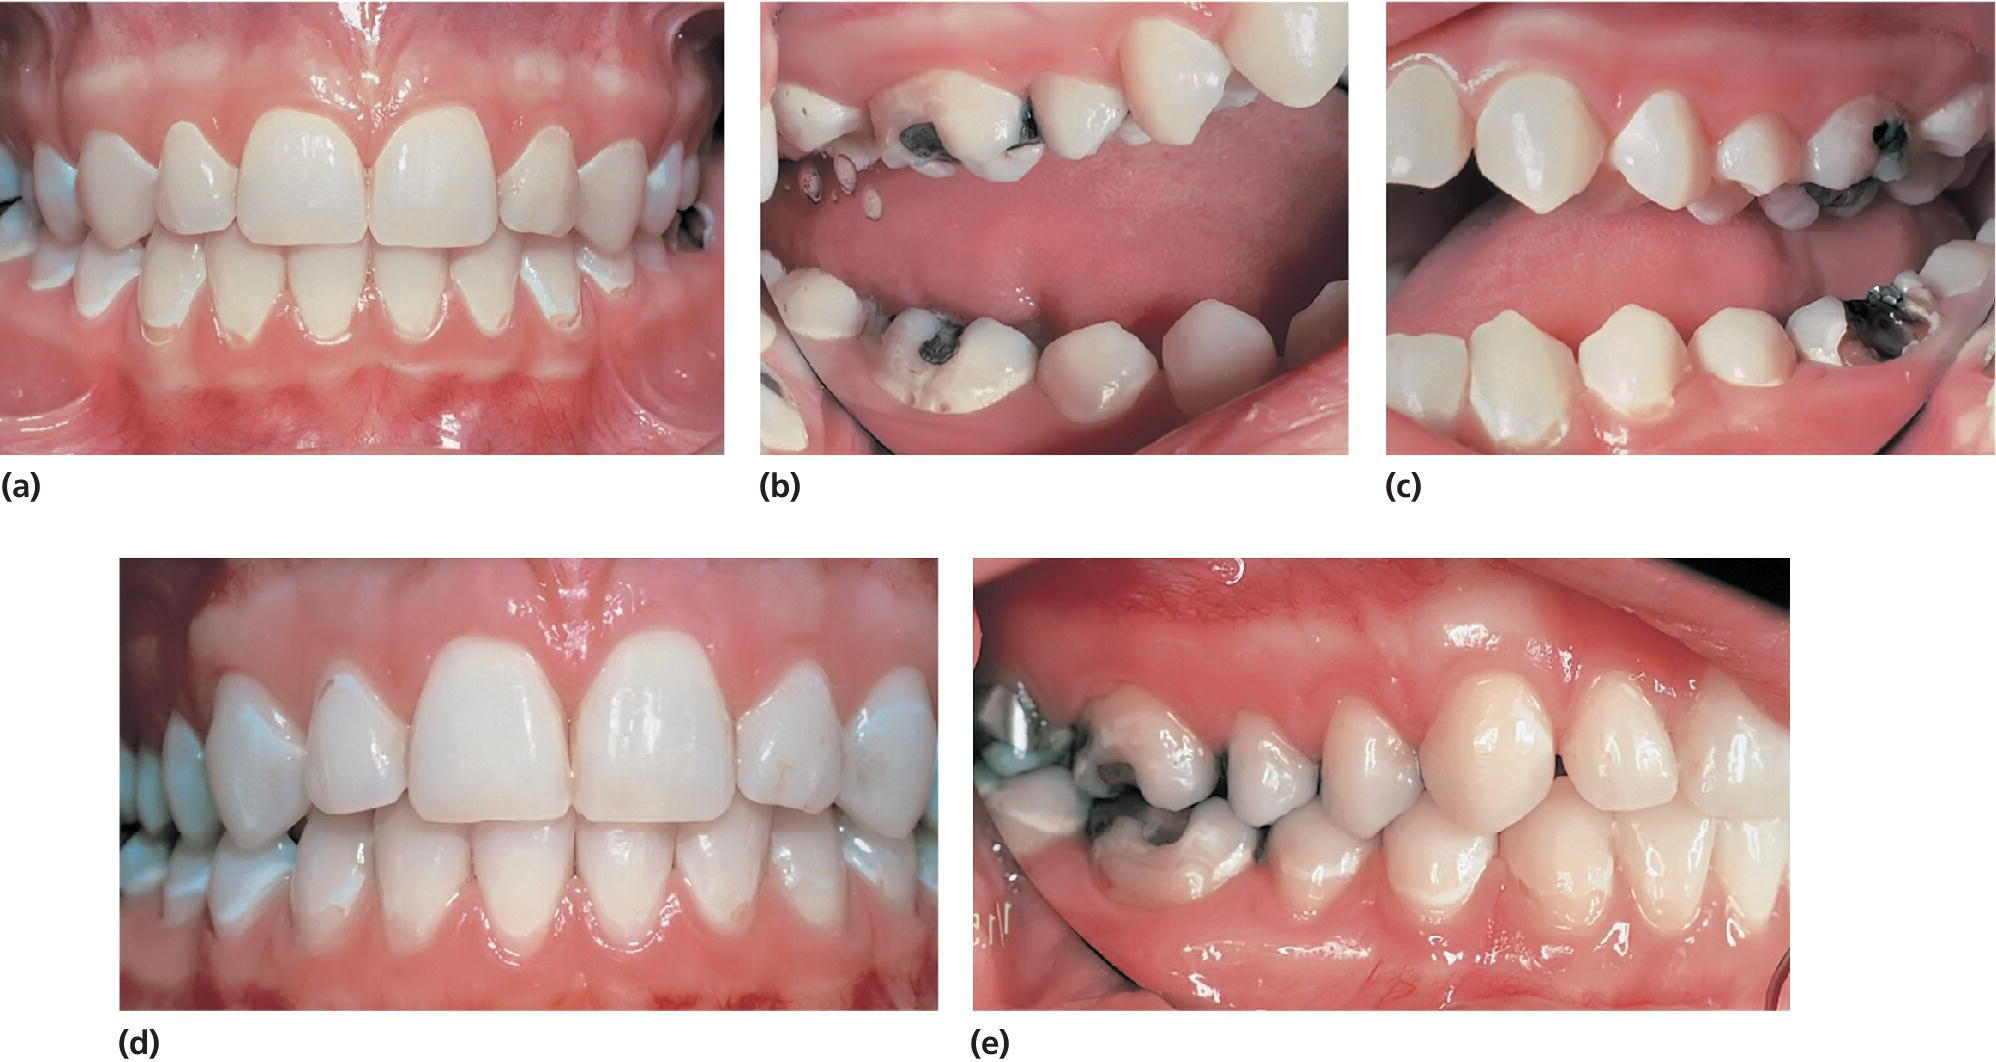 Photos displaying teeth of a 13-year-old girl, with active caries (a–c), same teeth with adequate caries control, 5 years later (d), and same teeth still with adequate caries control, another 3 years later (e).